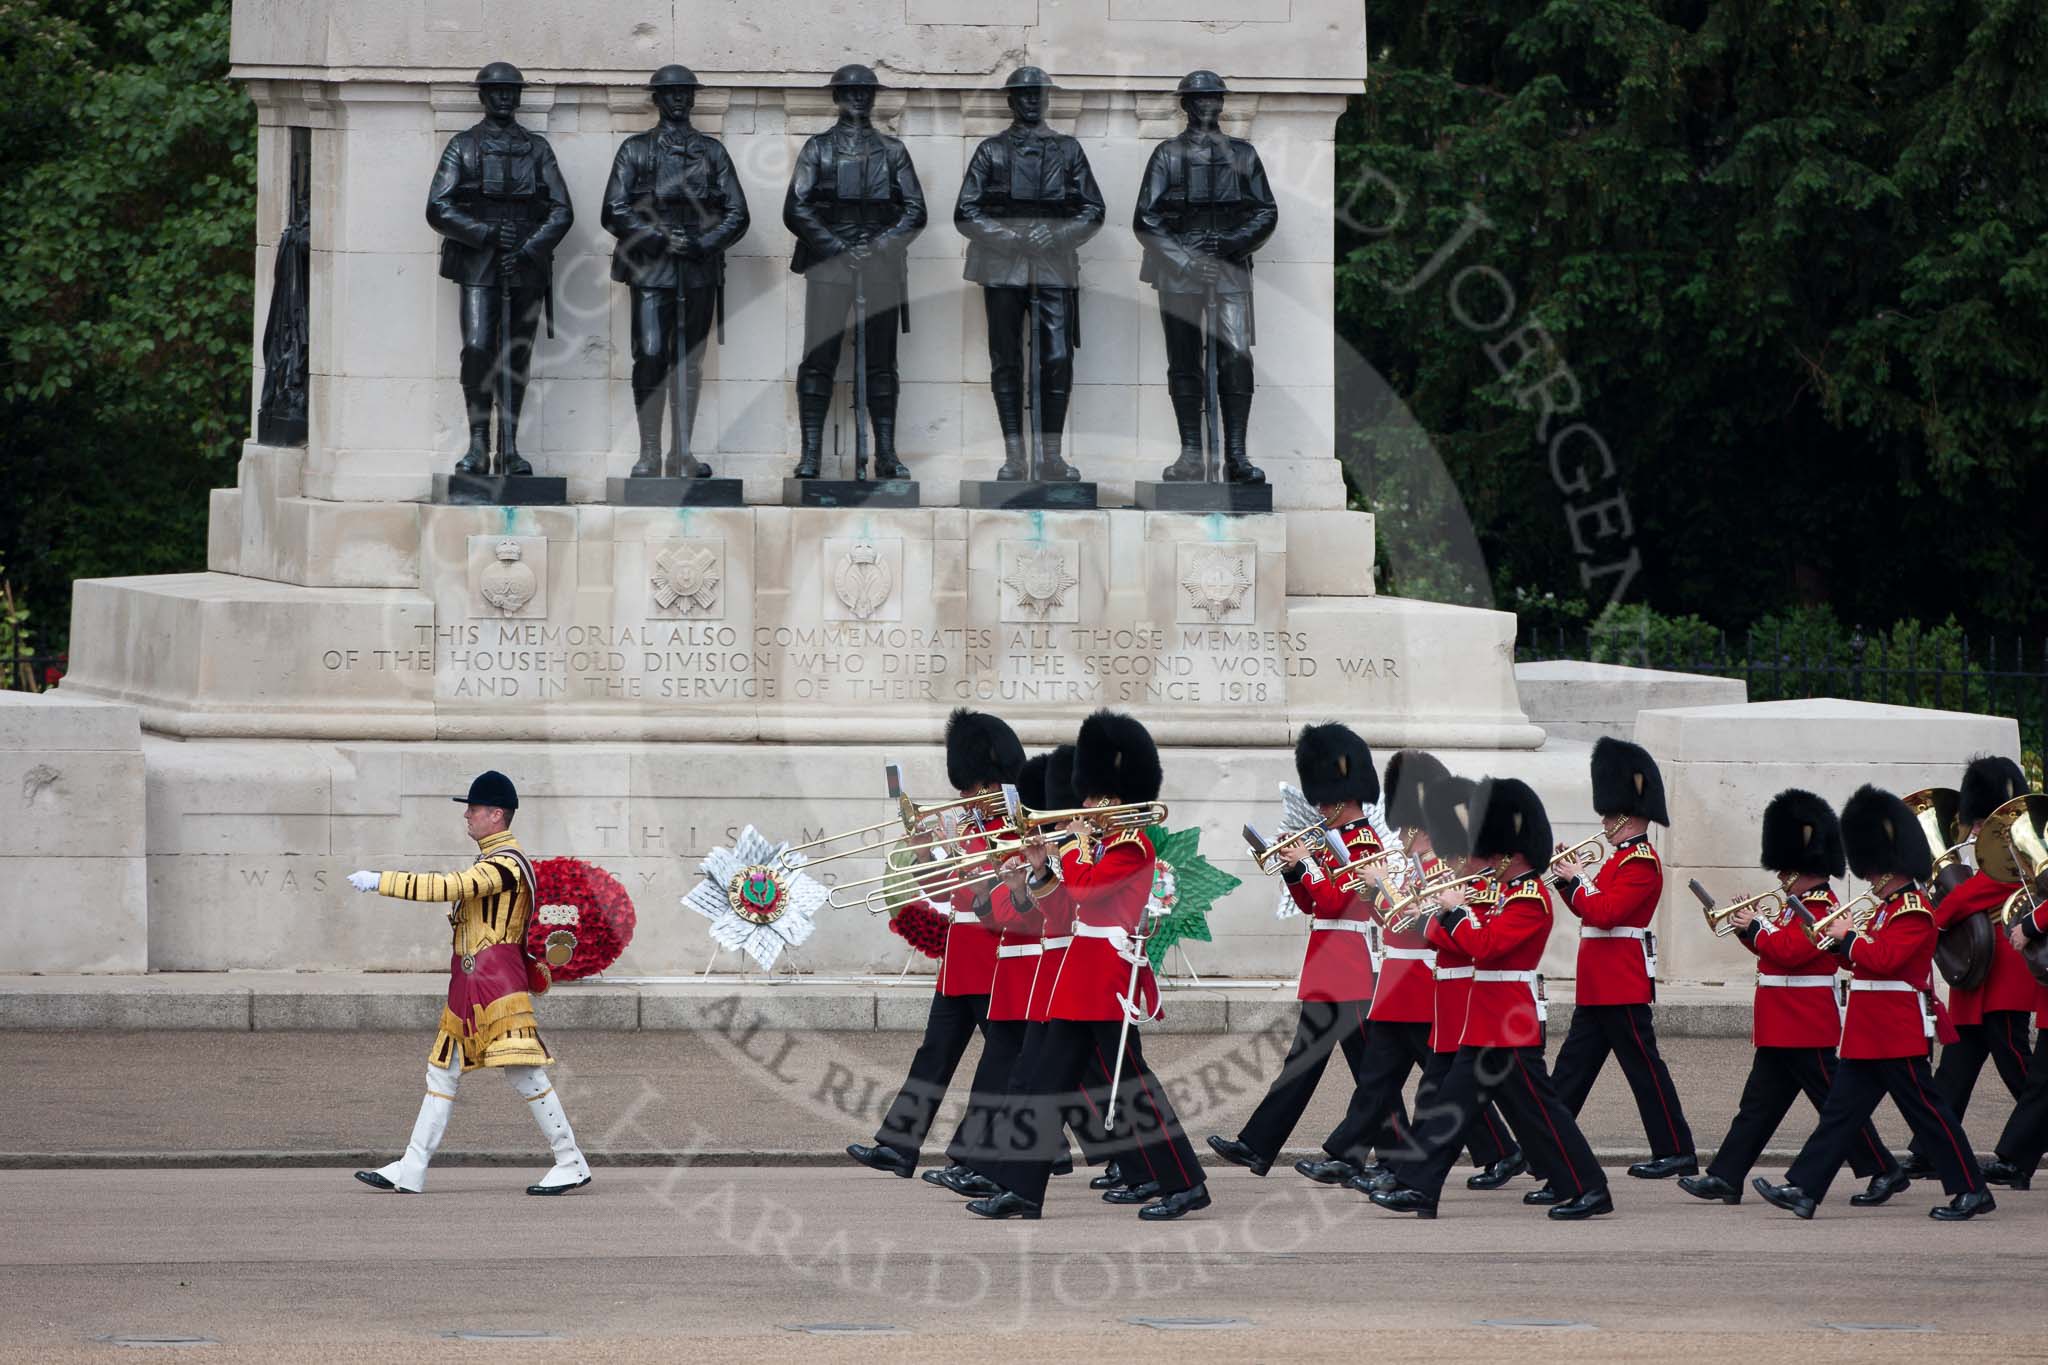 Trooping the Colour 2009: Senior Drum Major Tony Moors, Grenadier Guards, leading the Band of the Grenadier Guards along the Guards Memorial towards the parade ground..
Horse Guards Parade, Westminster,
London SW1,

United Kingdom,
on 13 June 2009 at 10:10, image #23